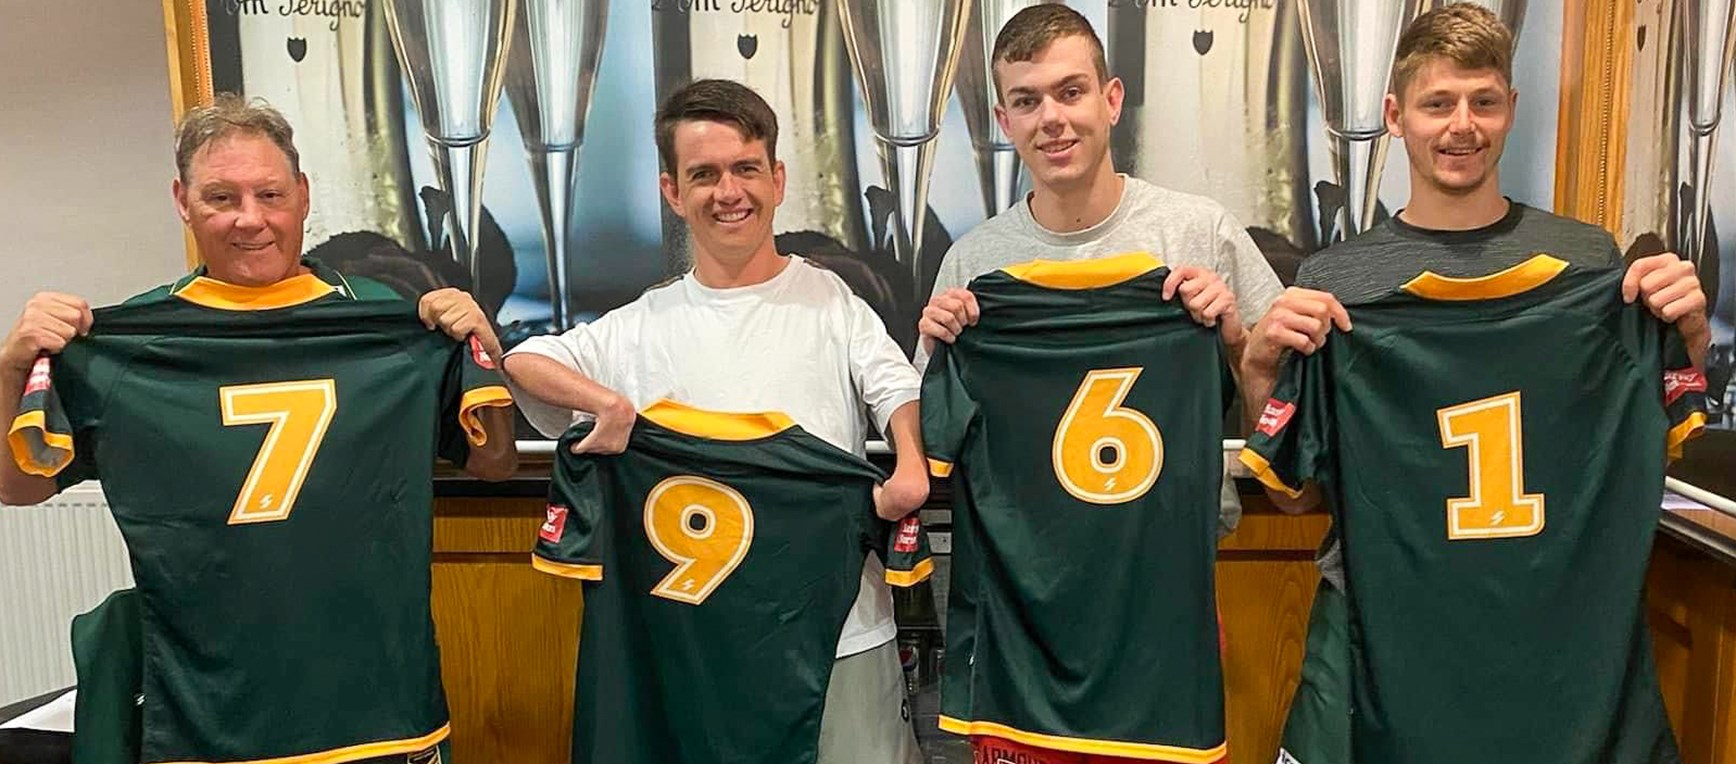 Gallery: Titans presented Australia PDRL jerseys ahead of World Cup opener